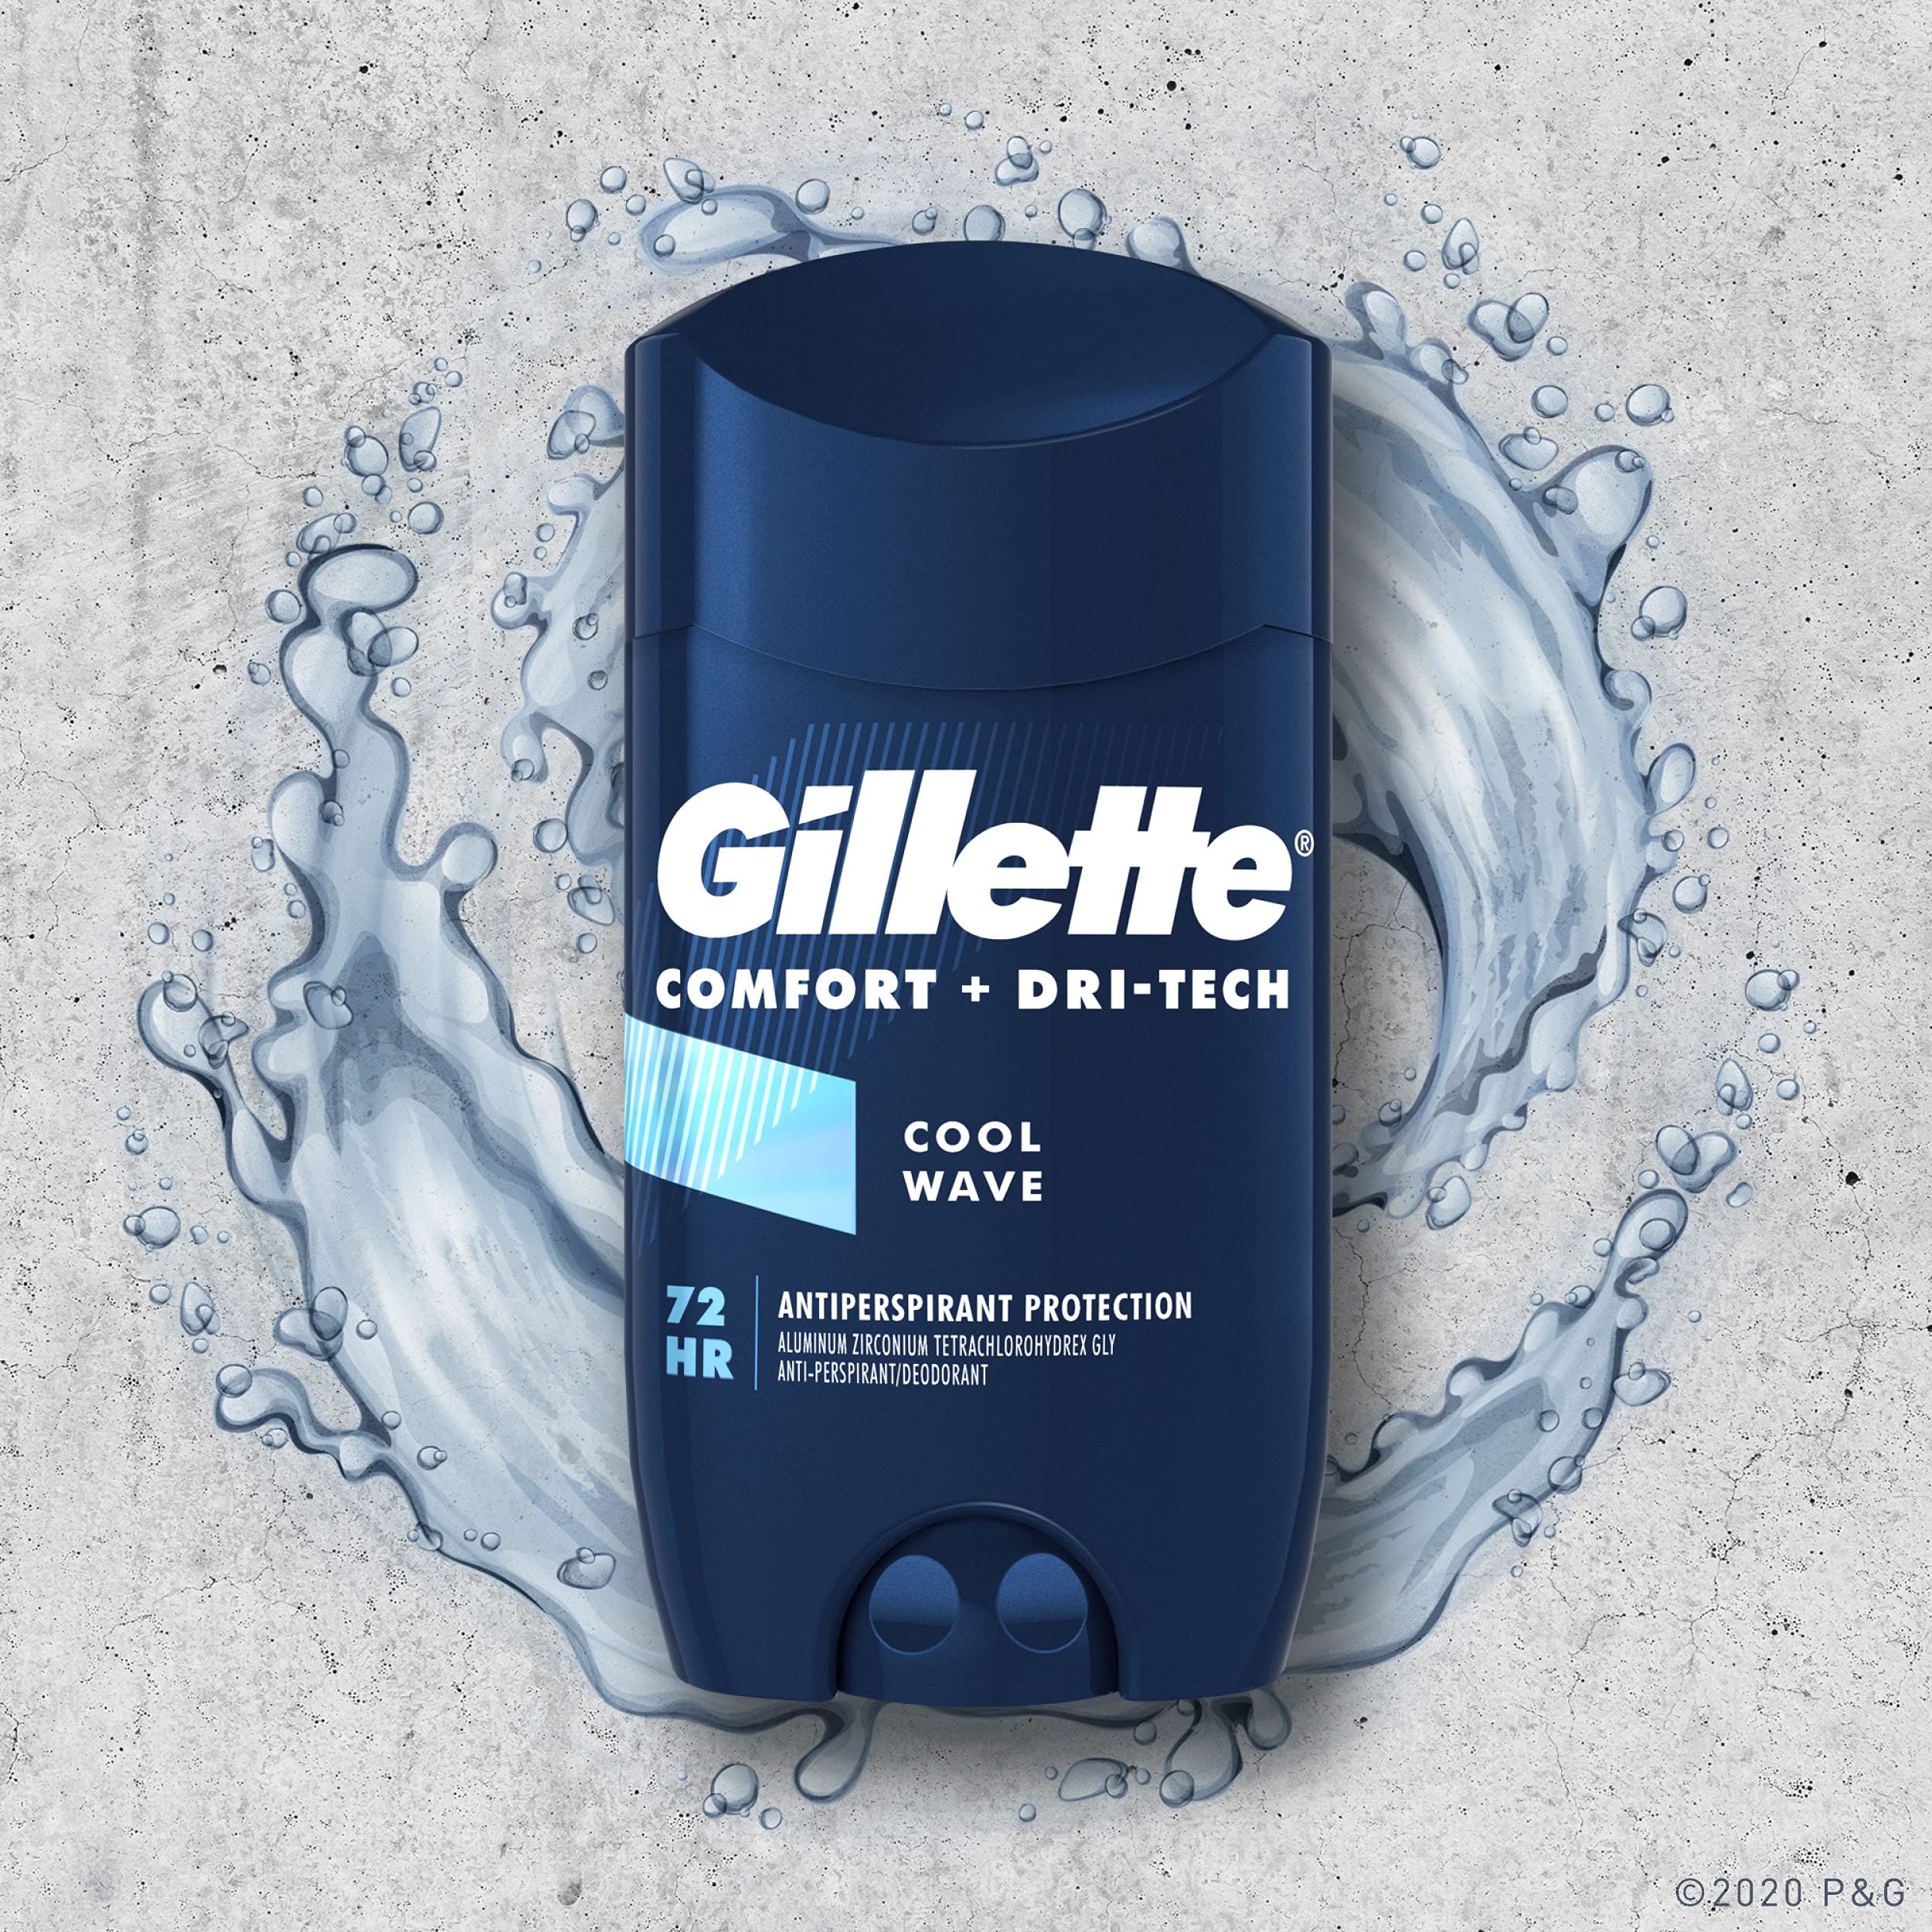 Gillette Antiperspirant Deodorant for Men, Invisible Solid, Cool Wave, 72 Hr. Sweat Protection, 3.4 oz